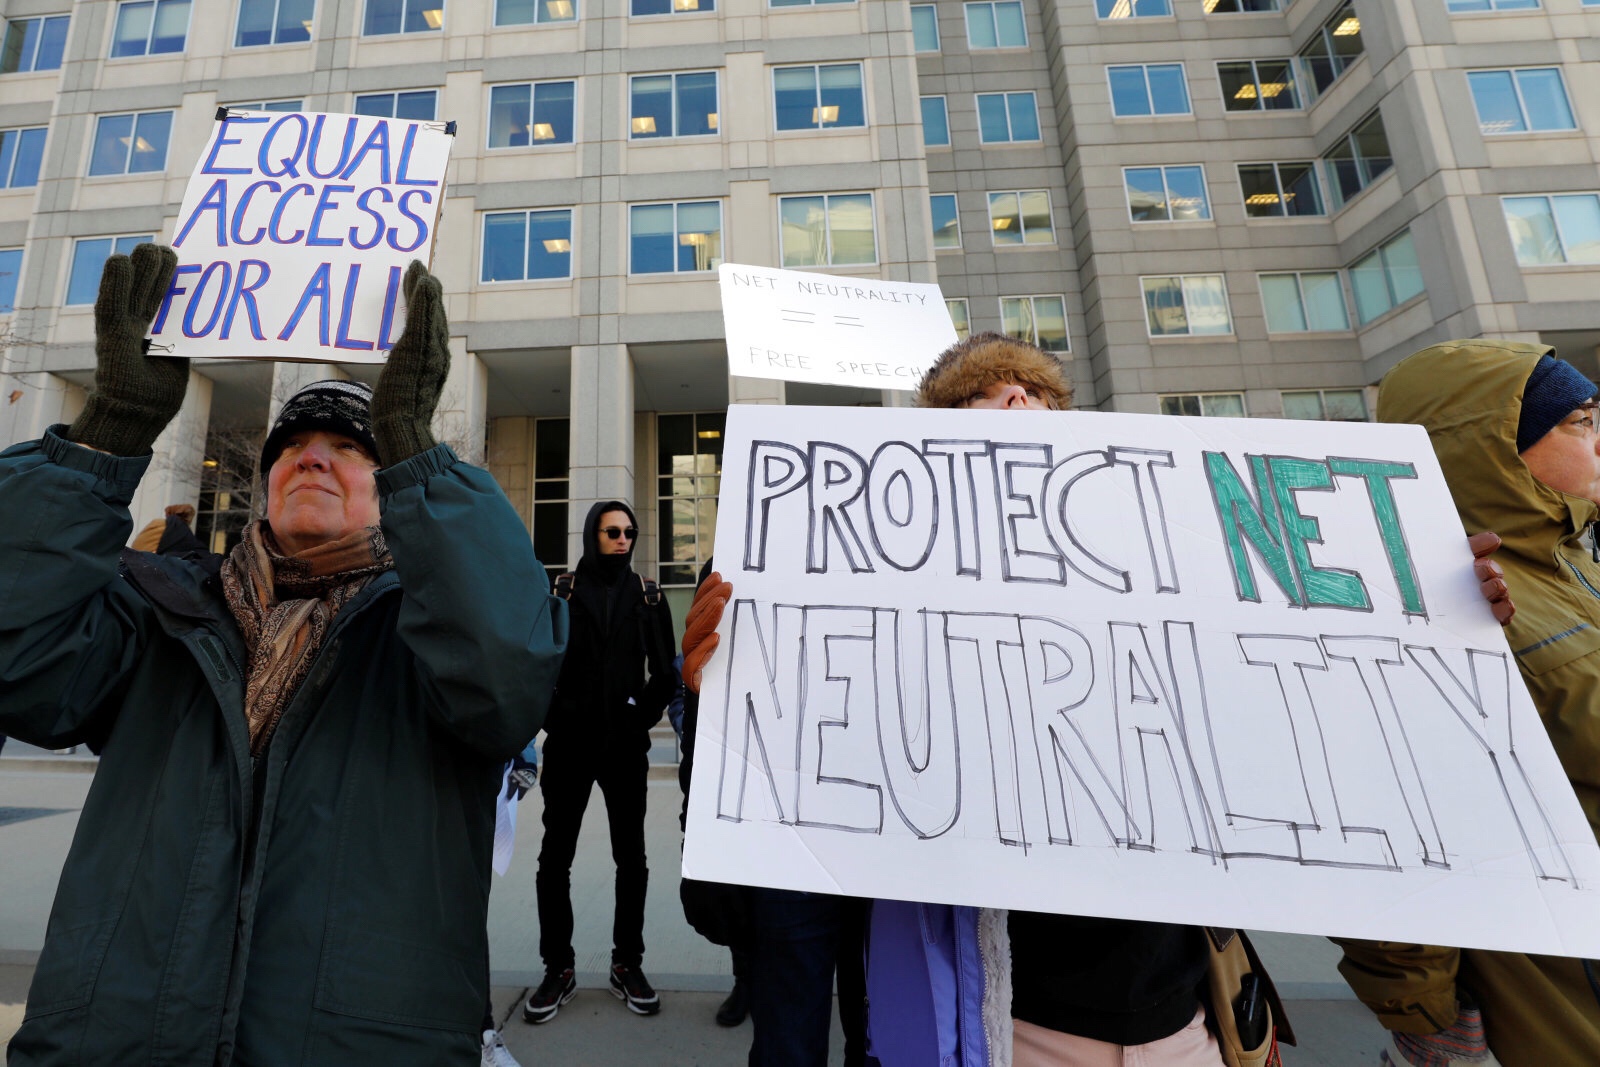 Six more tech companies have joined the right to save net neutrality